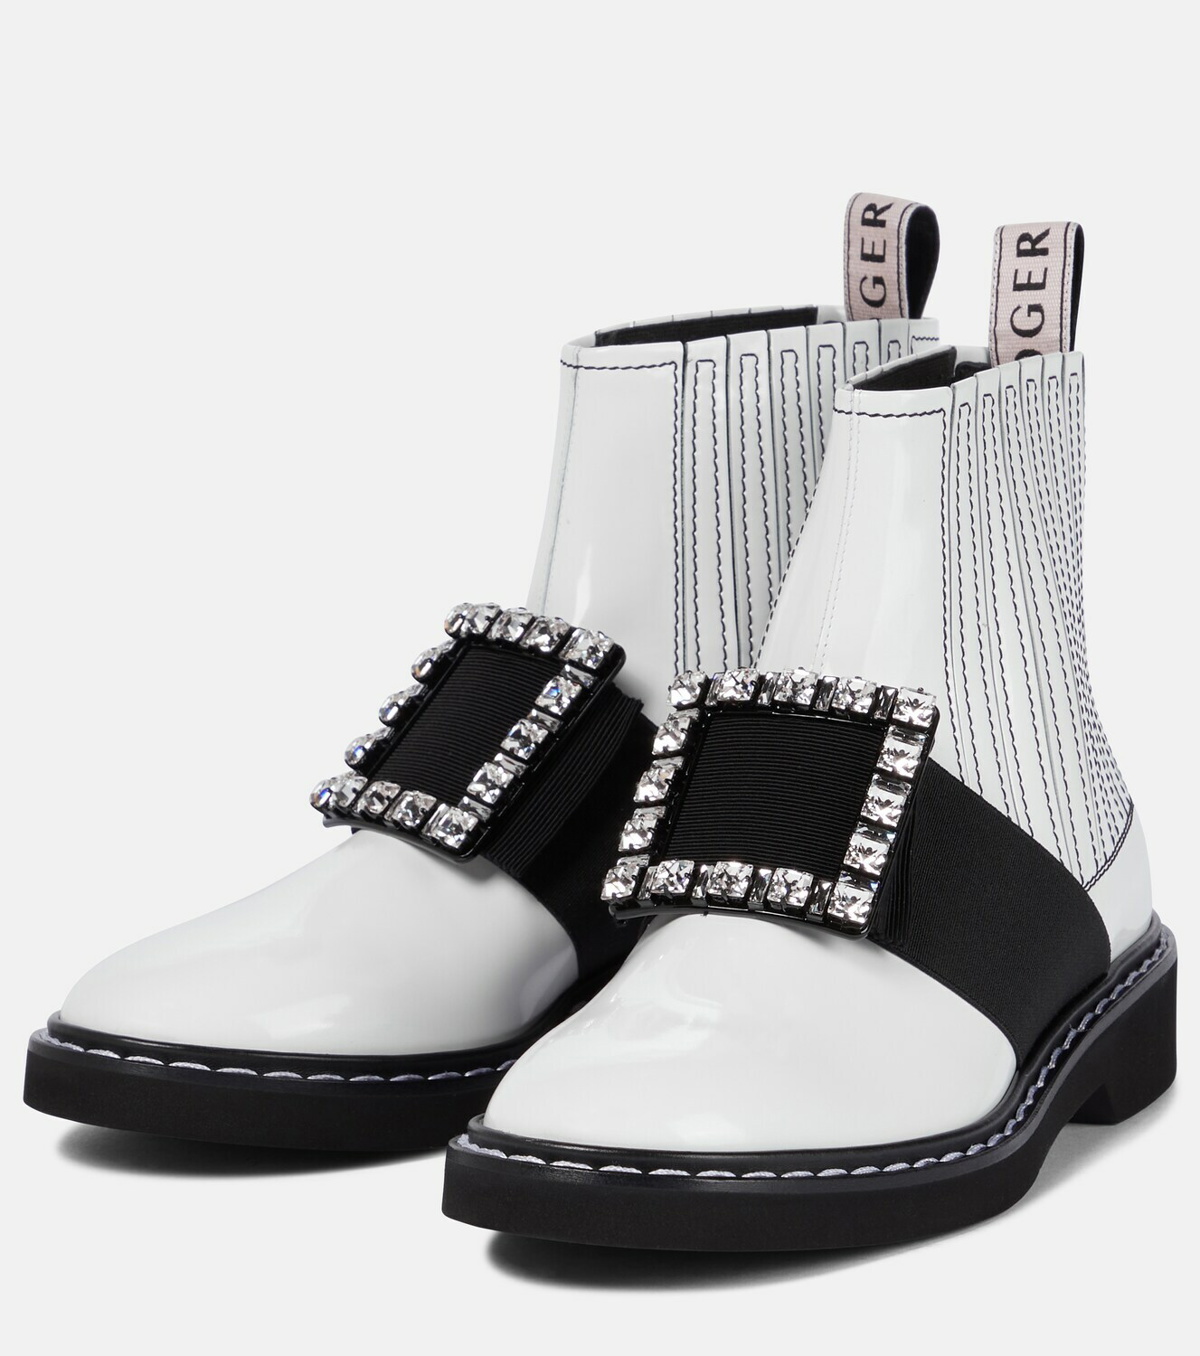 Roger Vivier - Viv' Go-Thick Strass Buckle Chealsea Ankle Boots in Patent Leather, White, Scarpe, Size: 38